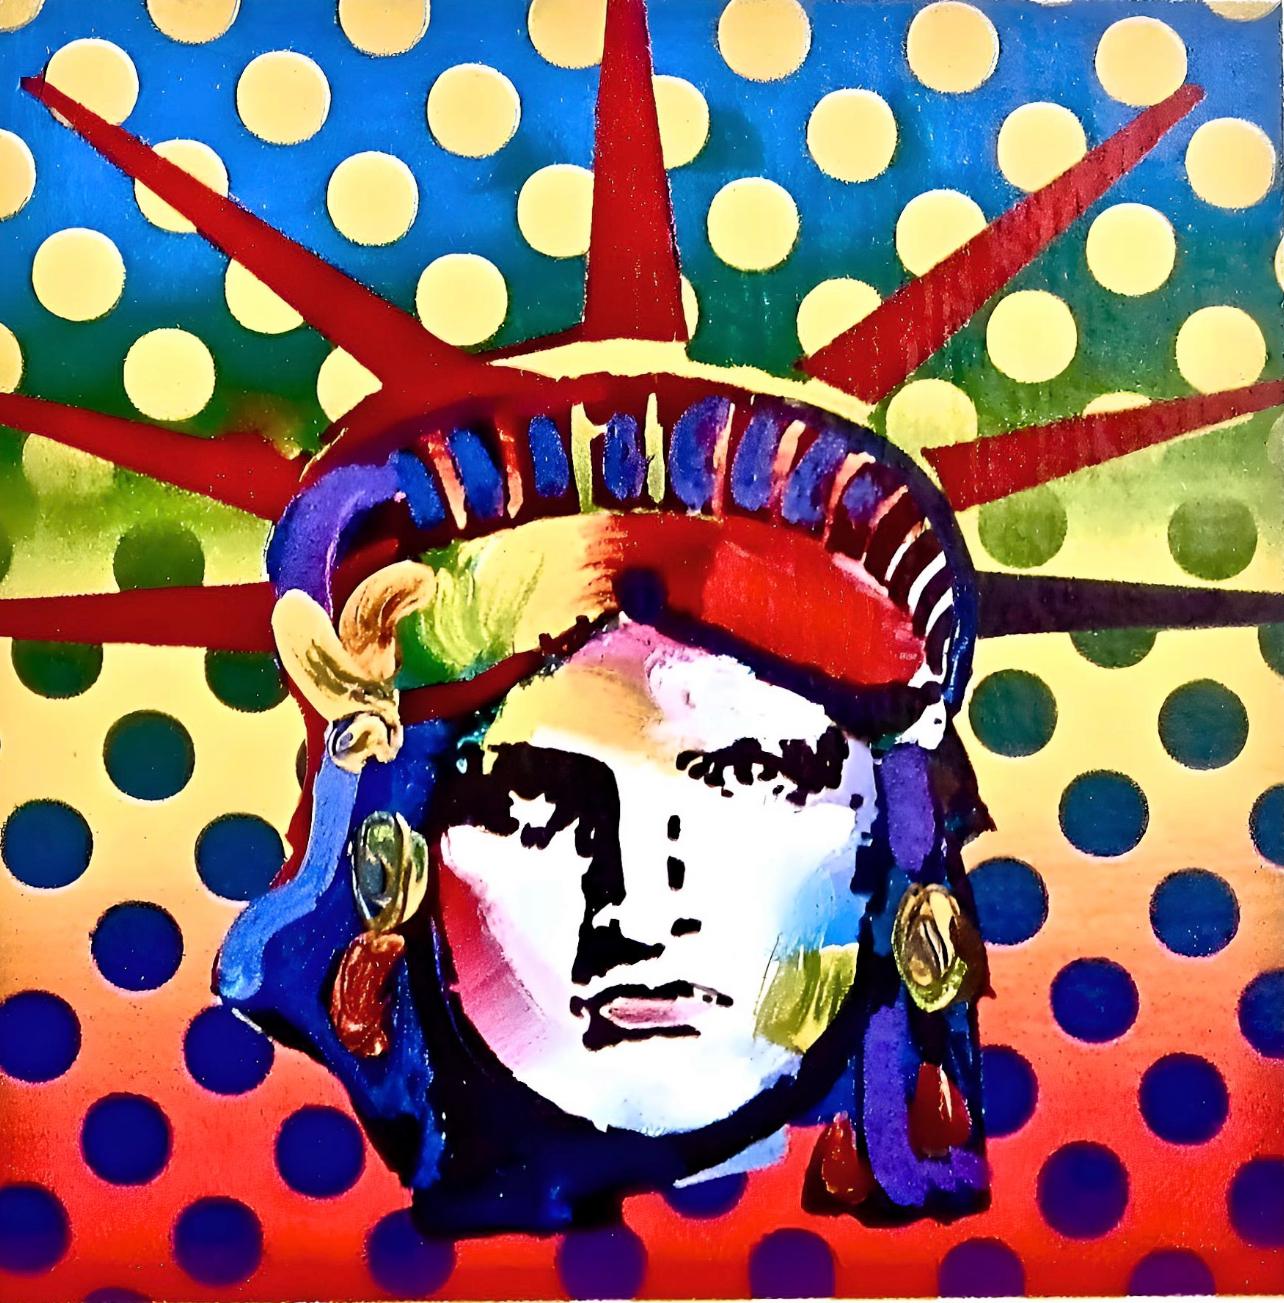 Artist: Peter Max (1937)
Title: Liberty Head V
Year: 2001
Edition: 454/500, plus proofs
Medium: Lithograph on Lustro Saxony paper
Size: 3.5 x 3 inches
Condition: Excellent
Inscription: Signed and numbered by the artist.
Notes: Published by Via Max.